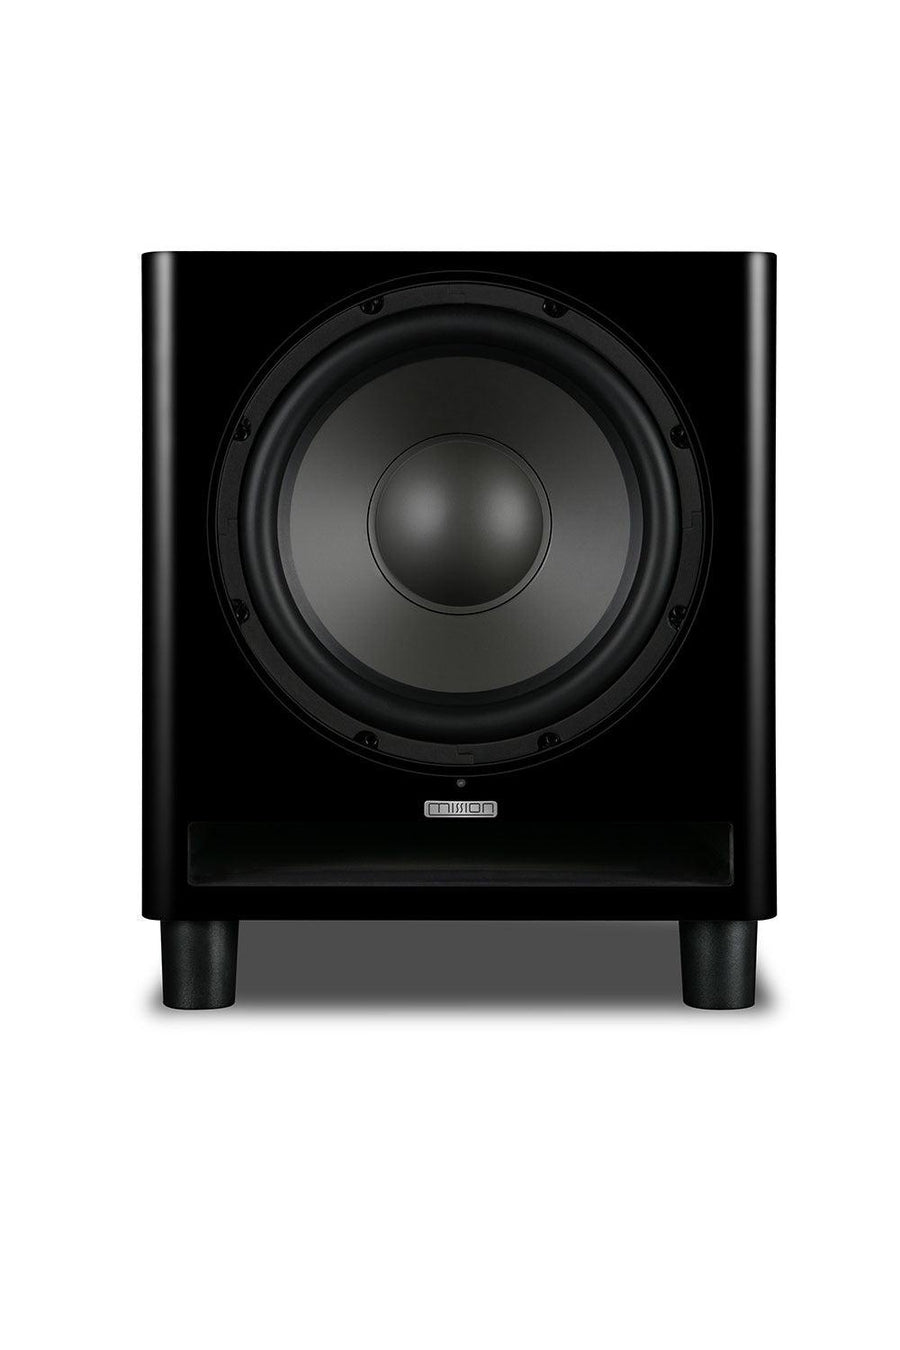 Mission ZX-12SUB Subwoofer- at Audio Influence